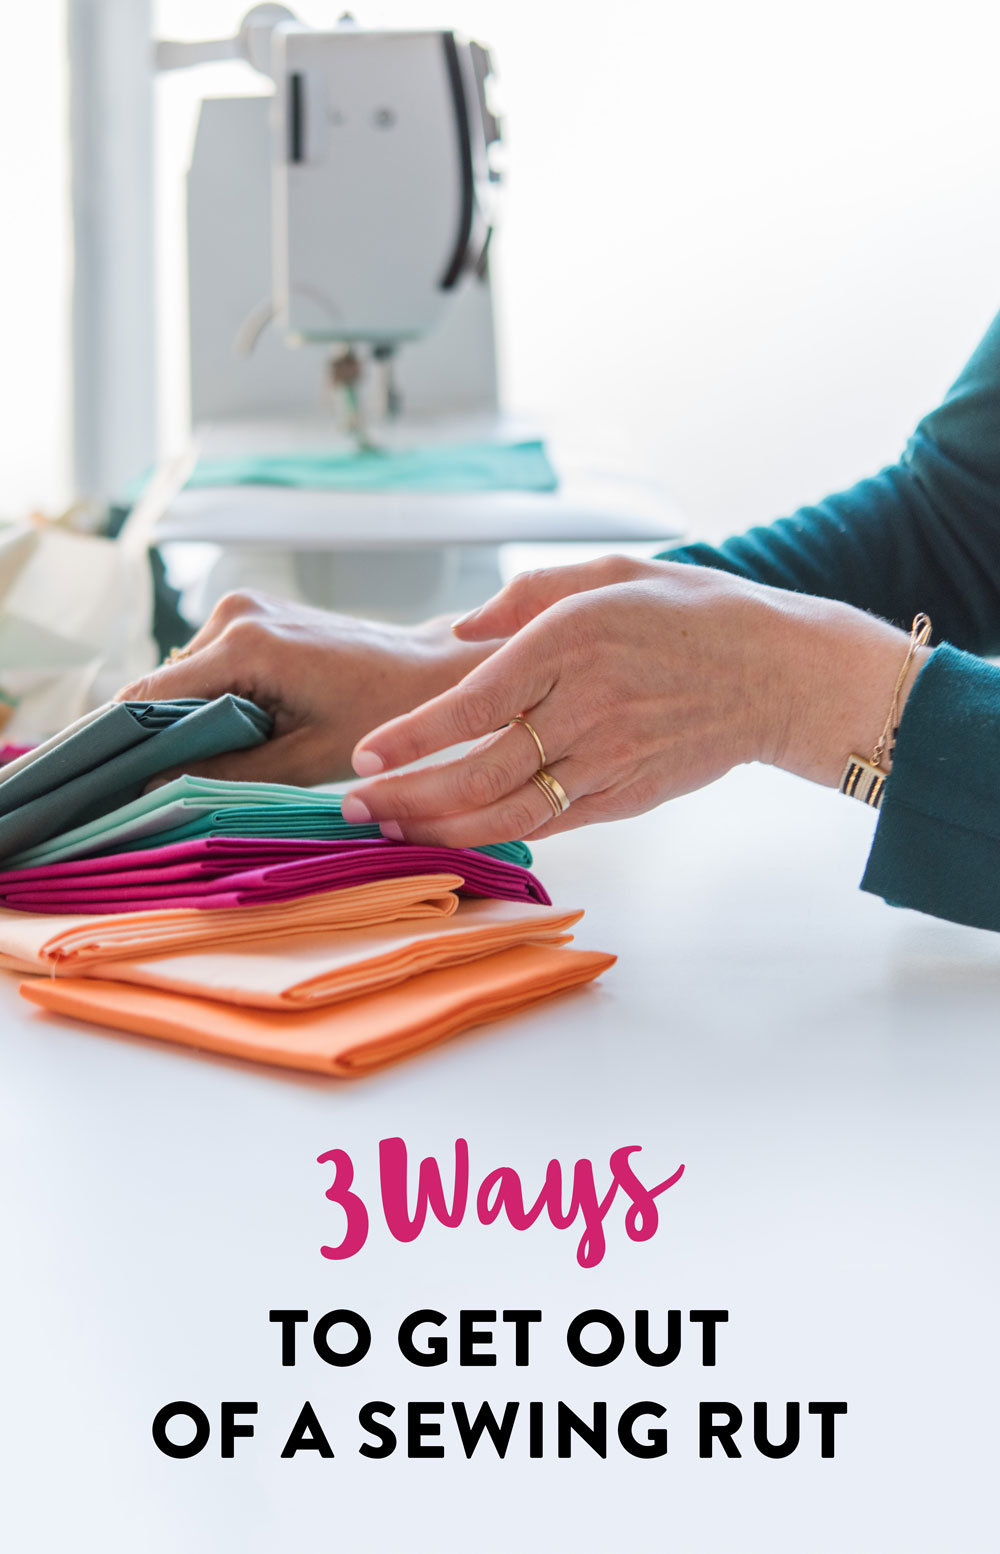 3 Strategies to Get Out of a Sewing Rut! Inspire your creativity for sewing! Suzy Quilts - https://suzyquilts.com/3-strategies-to-get-out-of-a-sewing-rut/